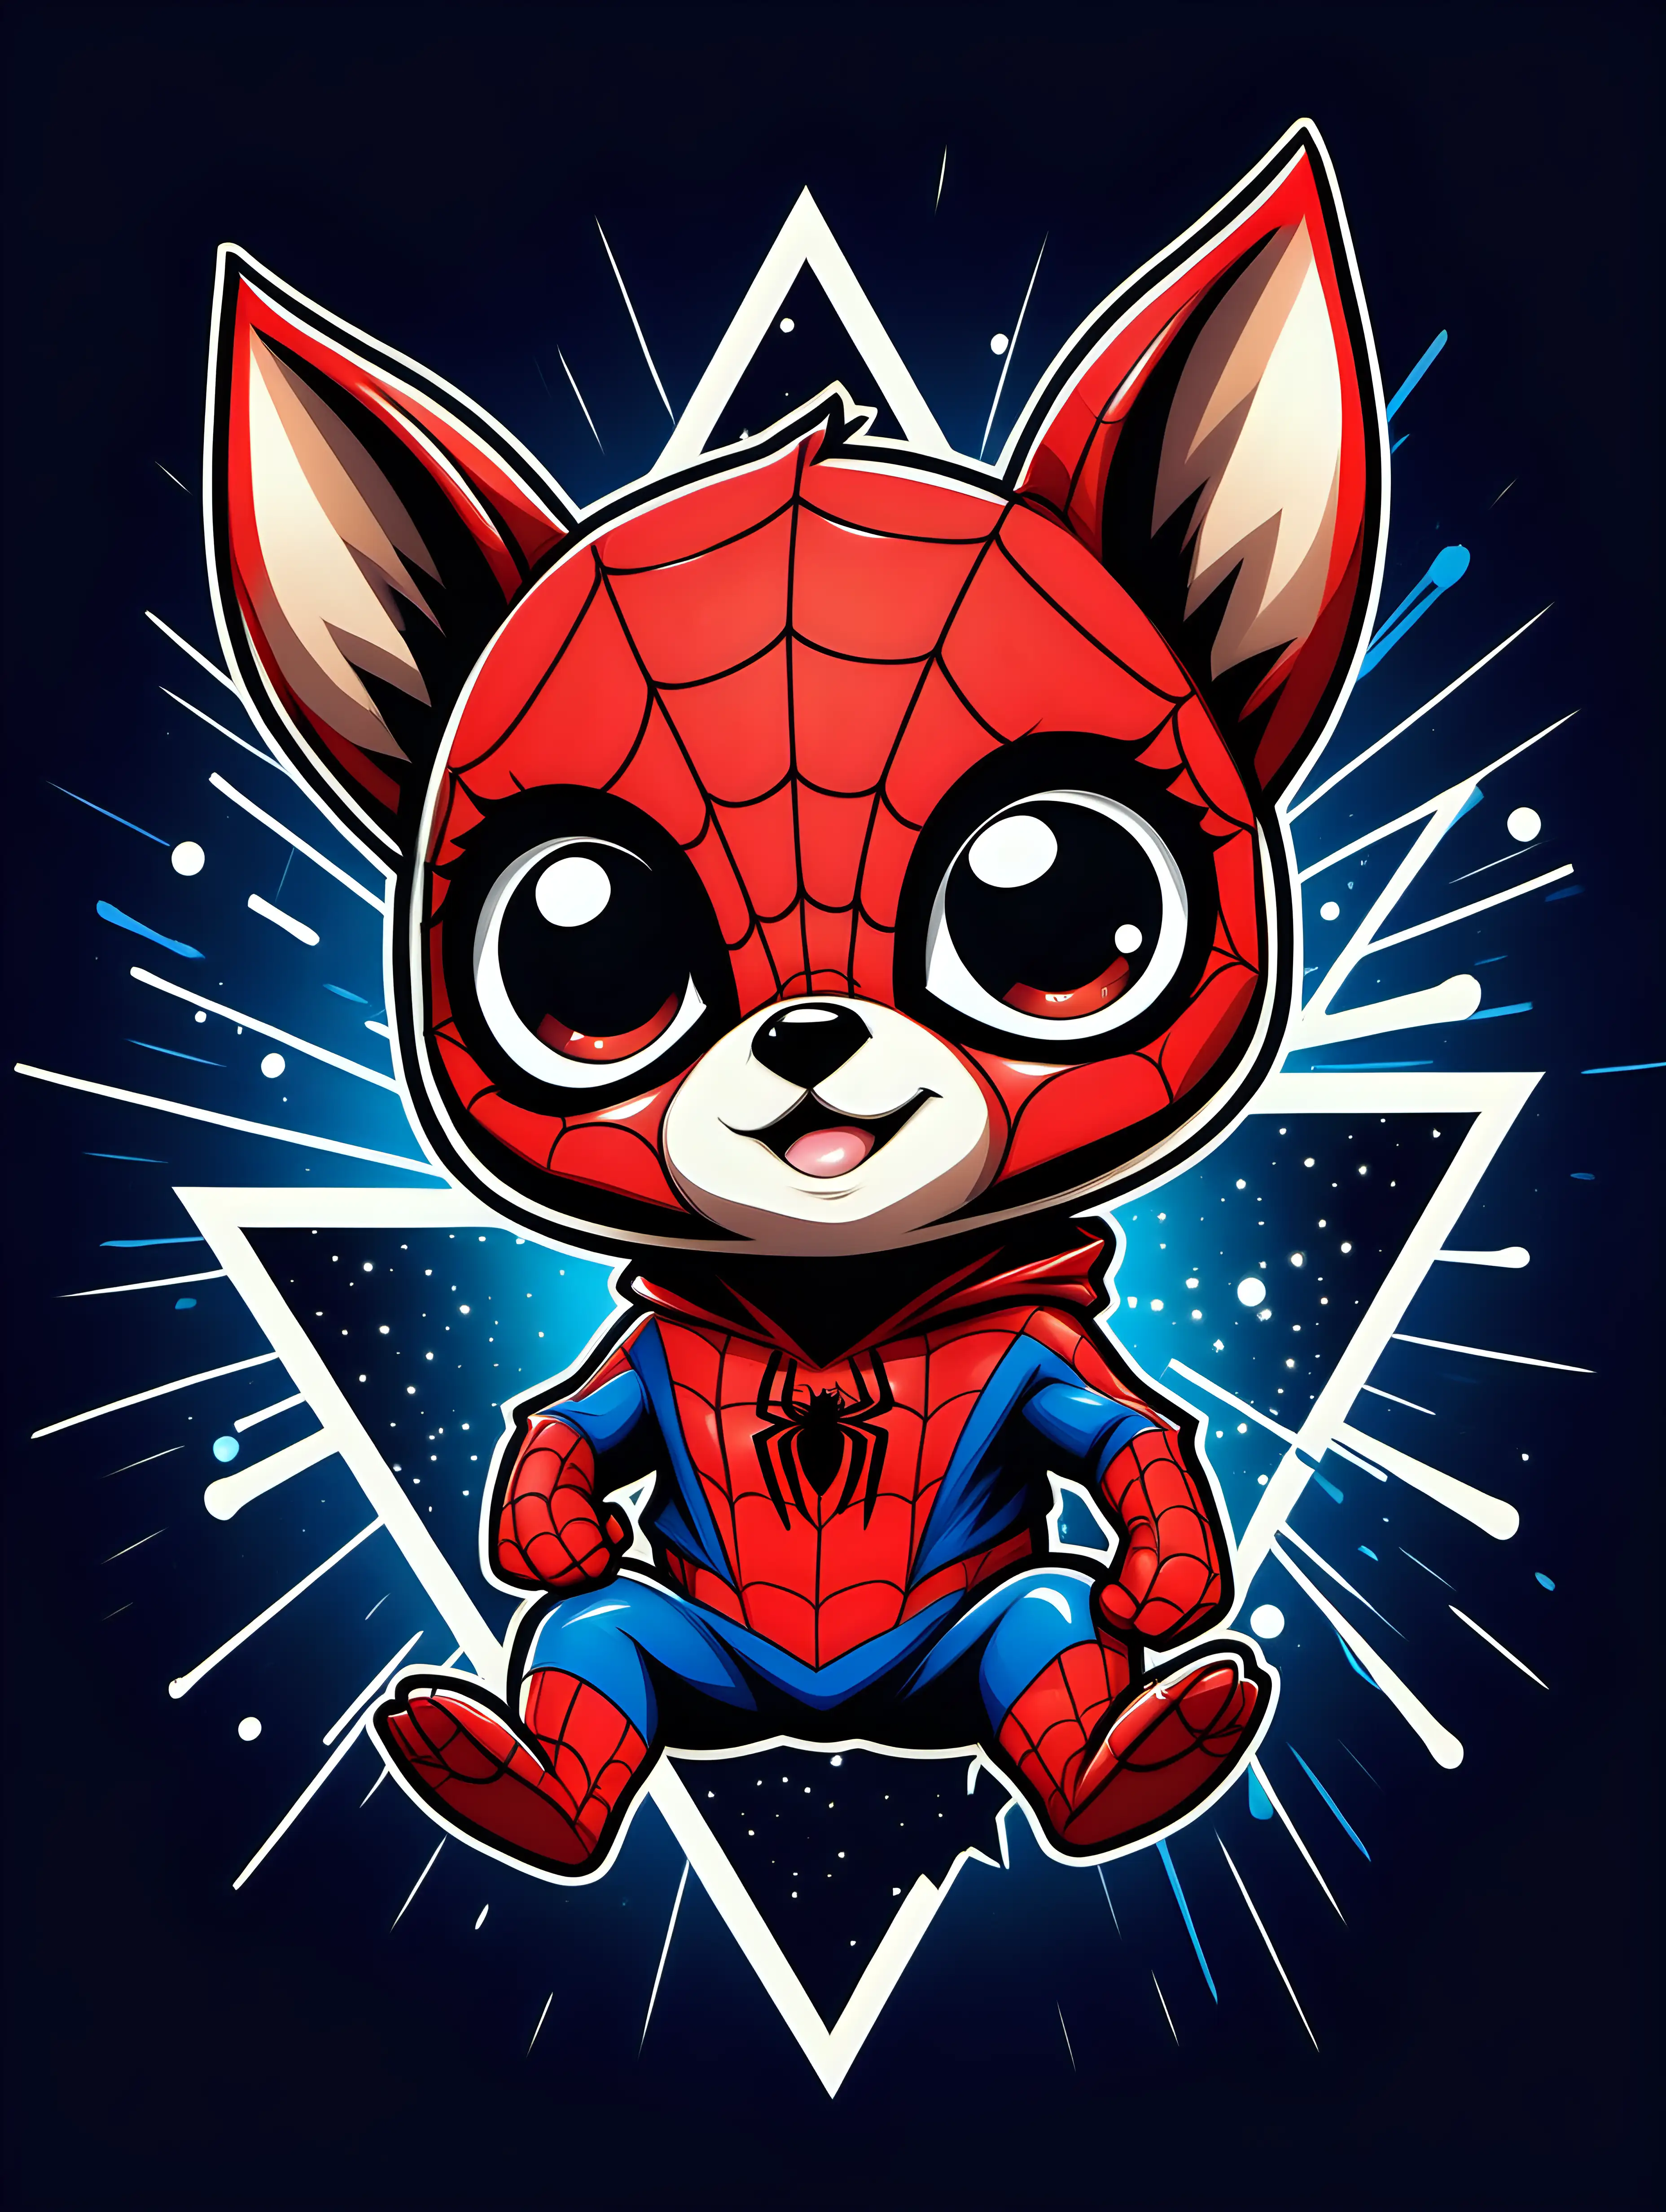 2d poster style, old style poster drawing, hight contrast, flat pop art style drawing of a triangle-shaped composition featuring a little cute chuhuahua puppy daredevil, smiling, dressed like Spiderman, glowing, hanging with head down like Spiderman. Anime, chibi style. Big head, small body, big eyes, very small muzzle, tiny nose. Cute face. The background is night city lights, filled with graffiti elements, incorporating vibrant electric colors, various shapes, and dynamic lights, urban  and streets elements. The overall image should be lively, colorful, and reflective of contemporary youth culture, embodying the energetic spirit of pop art. Drawing must be in 2d flat style, popart. 